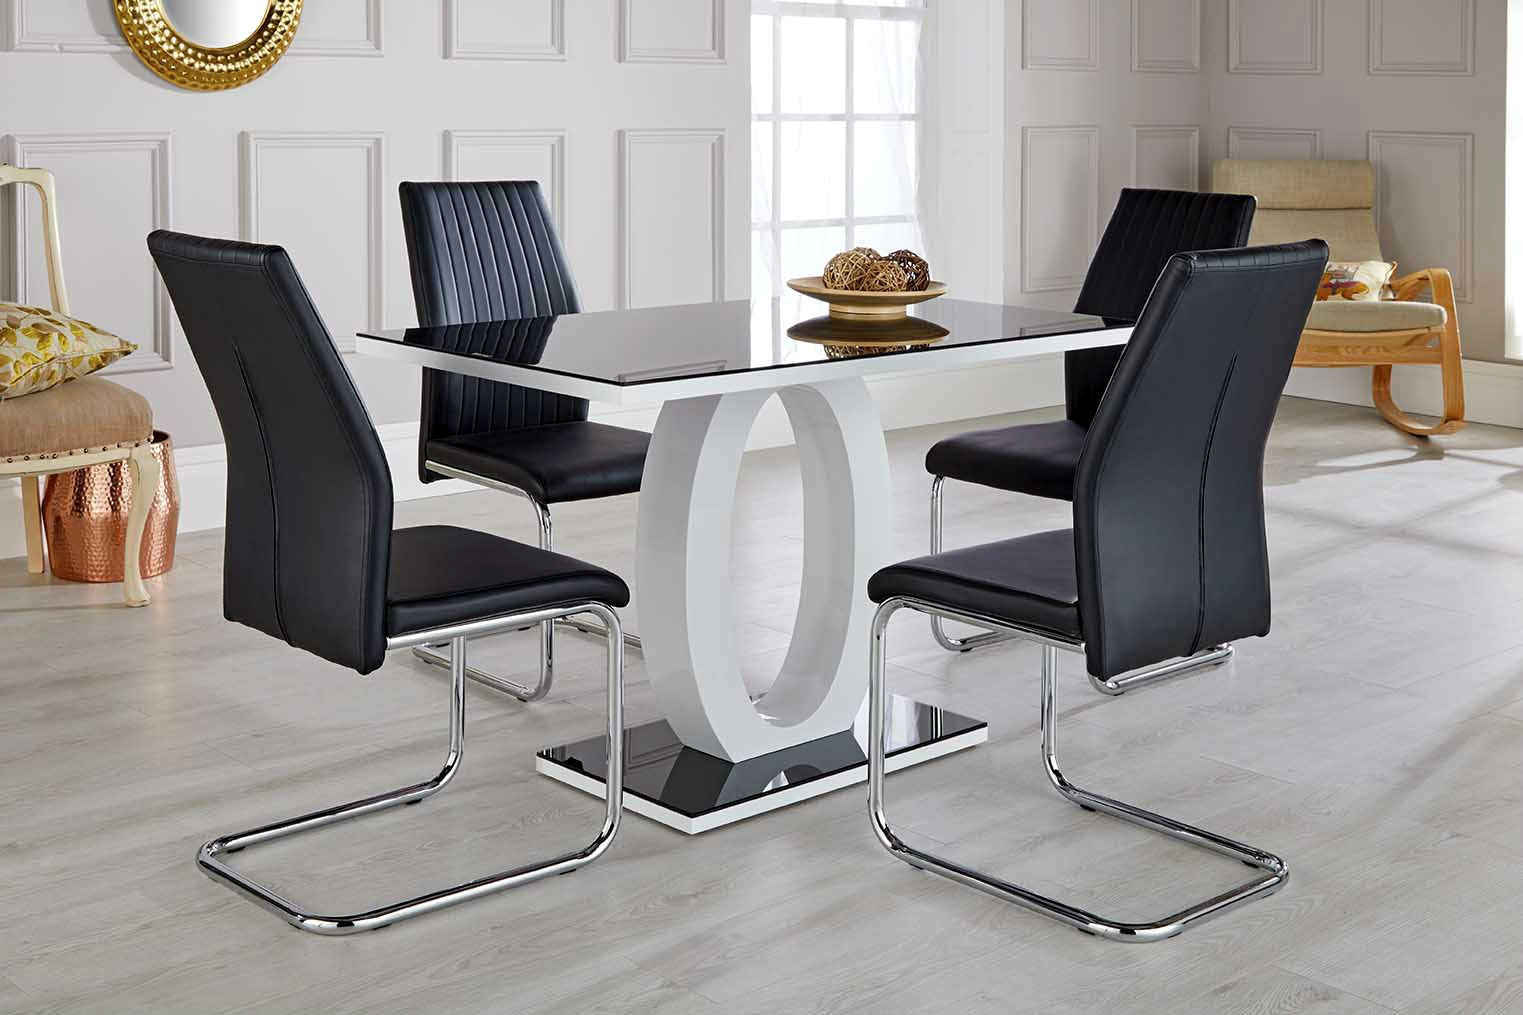 Montana Black High Gloss Dining Table with 4 Leather Chairs